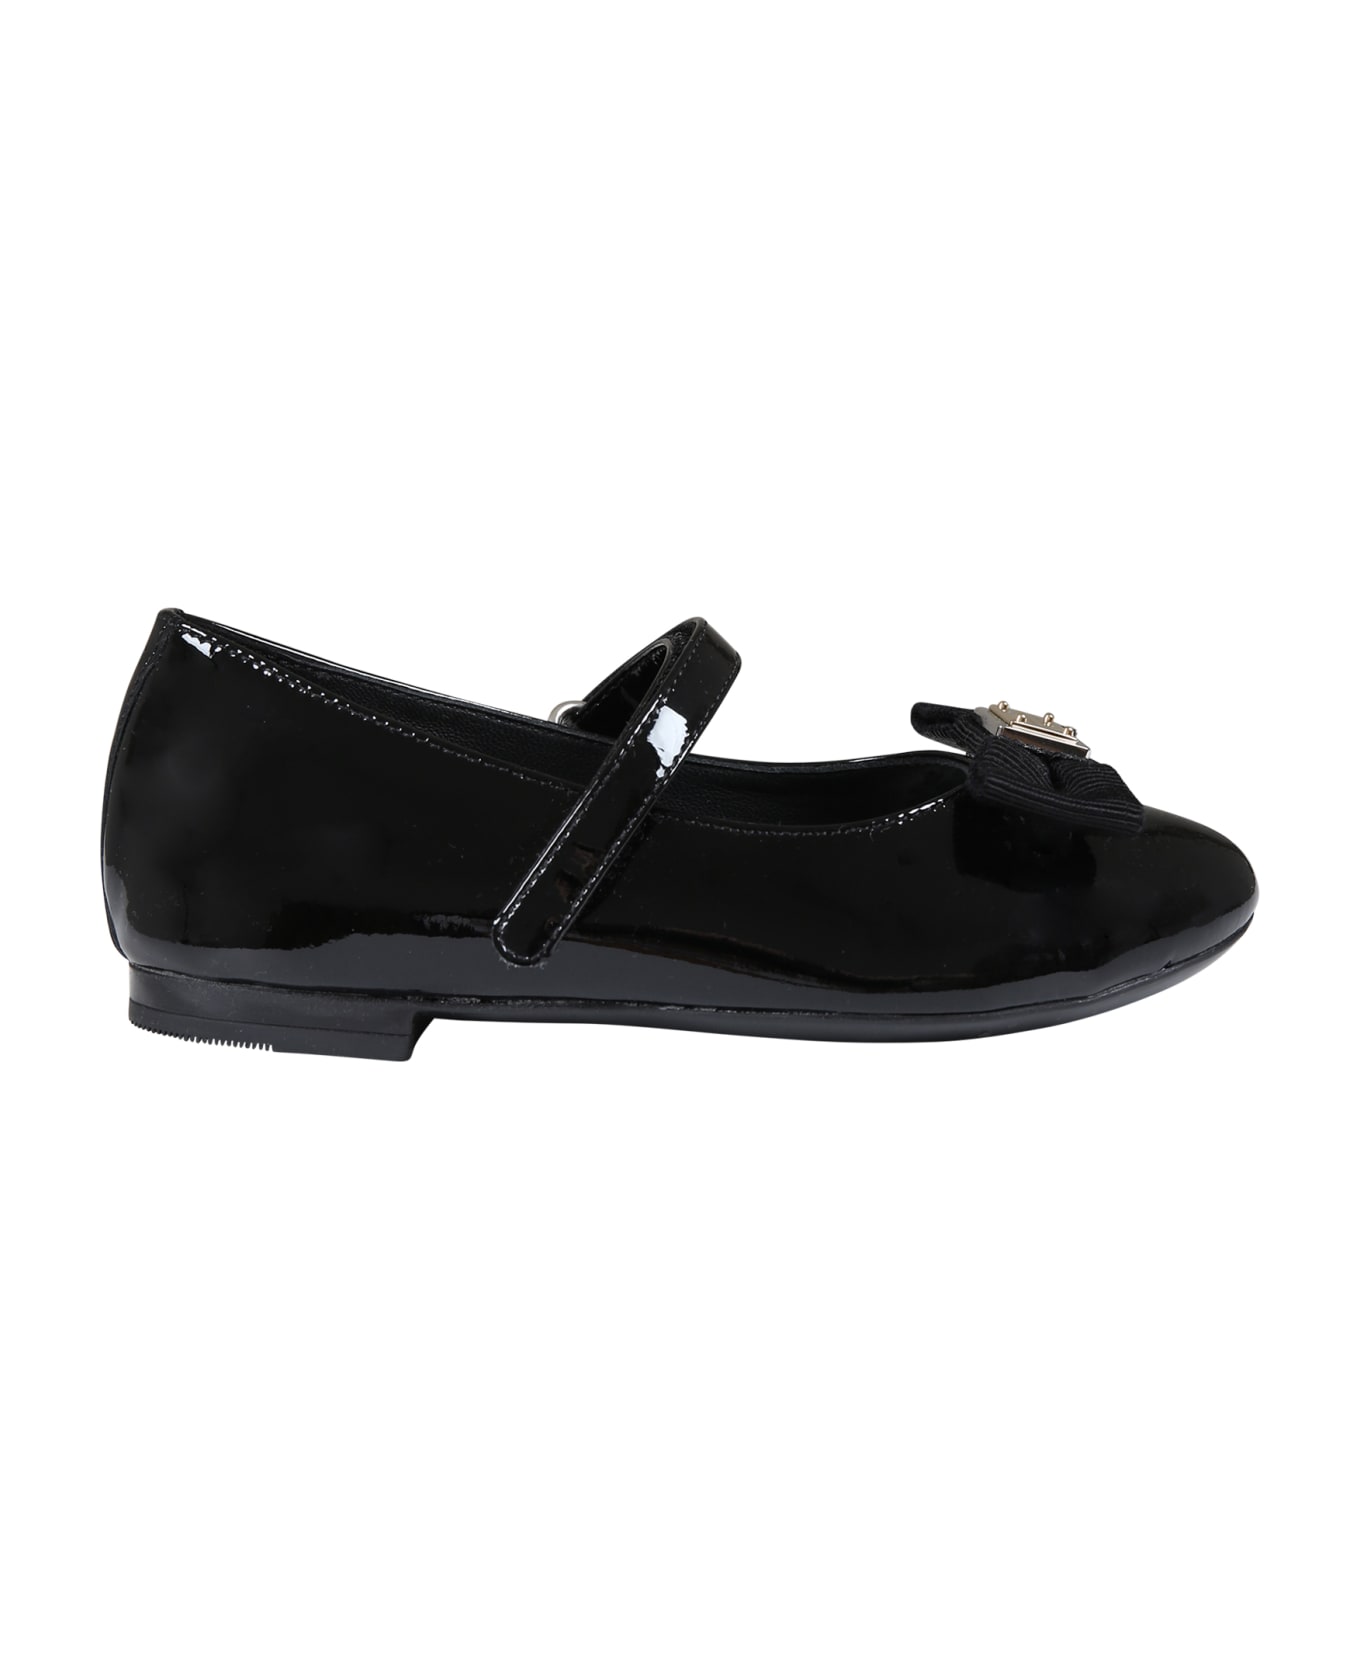 Dolce & Gabbana Black Ballet Flats For Girl With Logo And Bow - Black シューズ